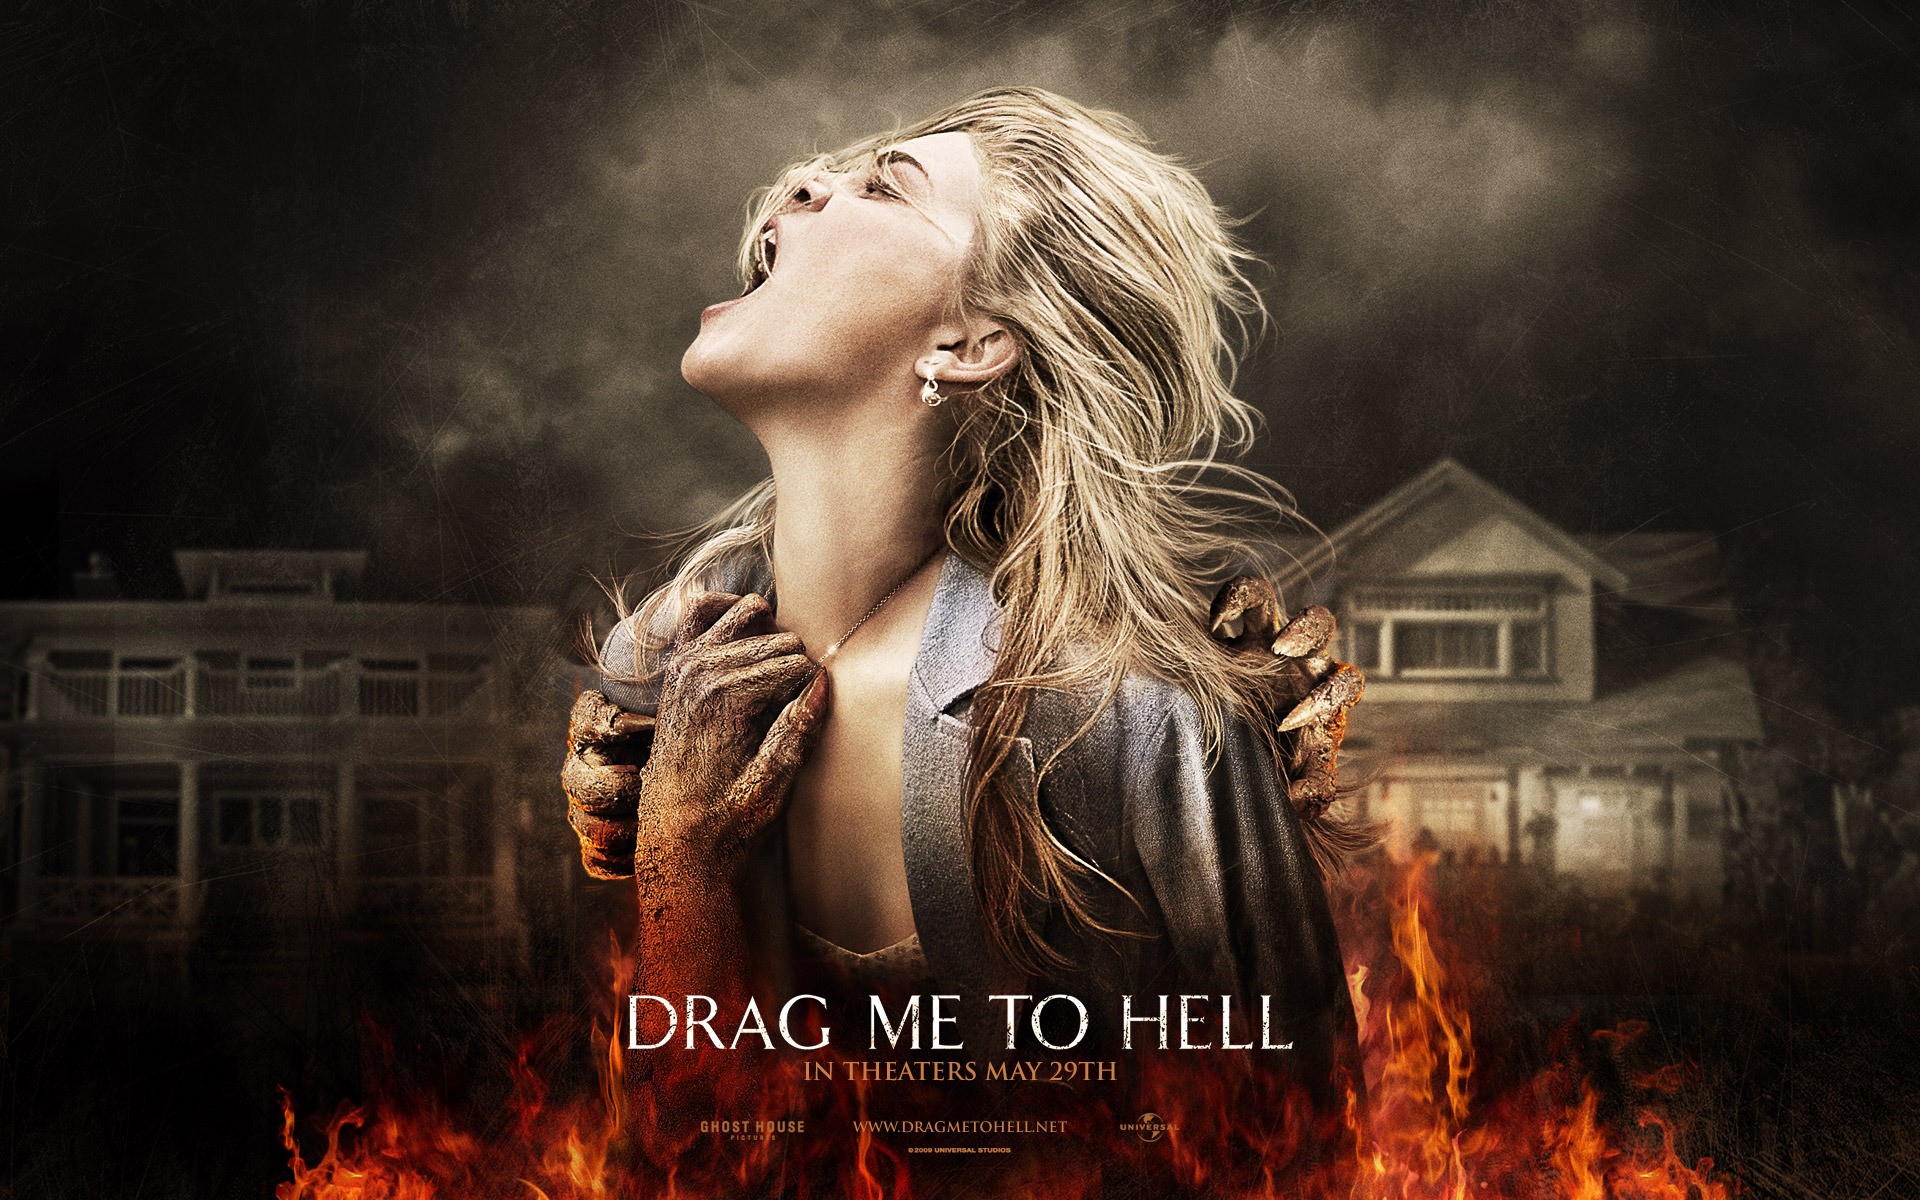 34-facts-about-the-movie-drag-me-to-hell